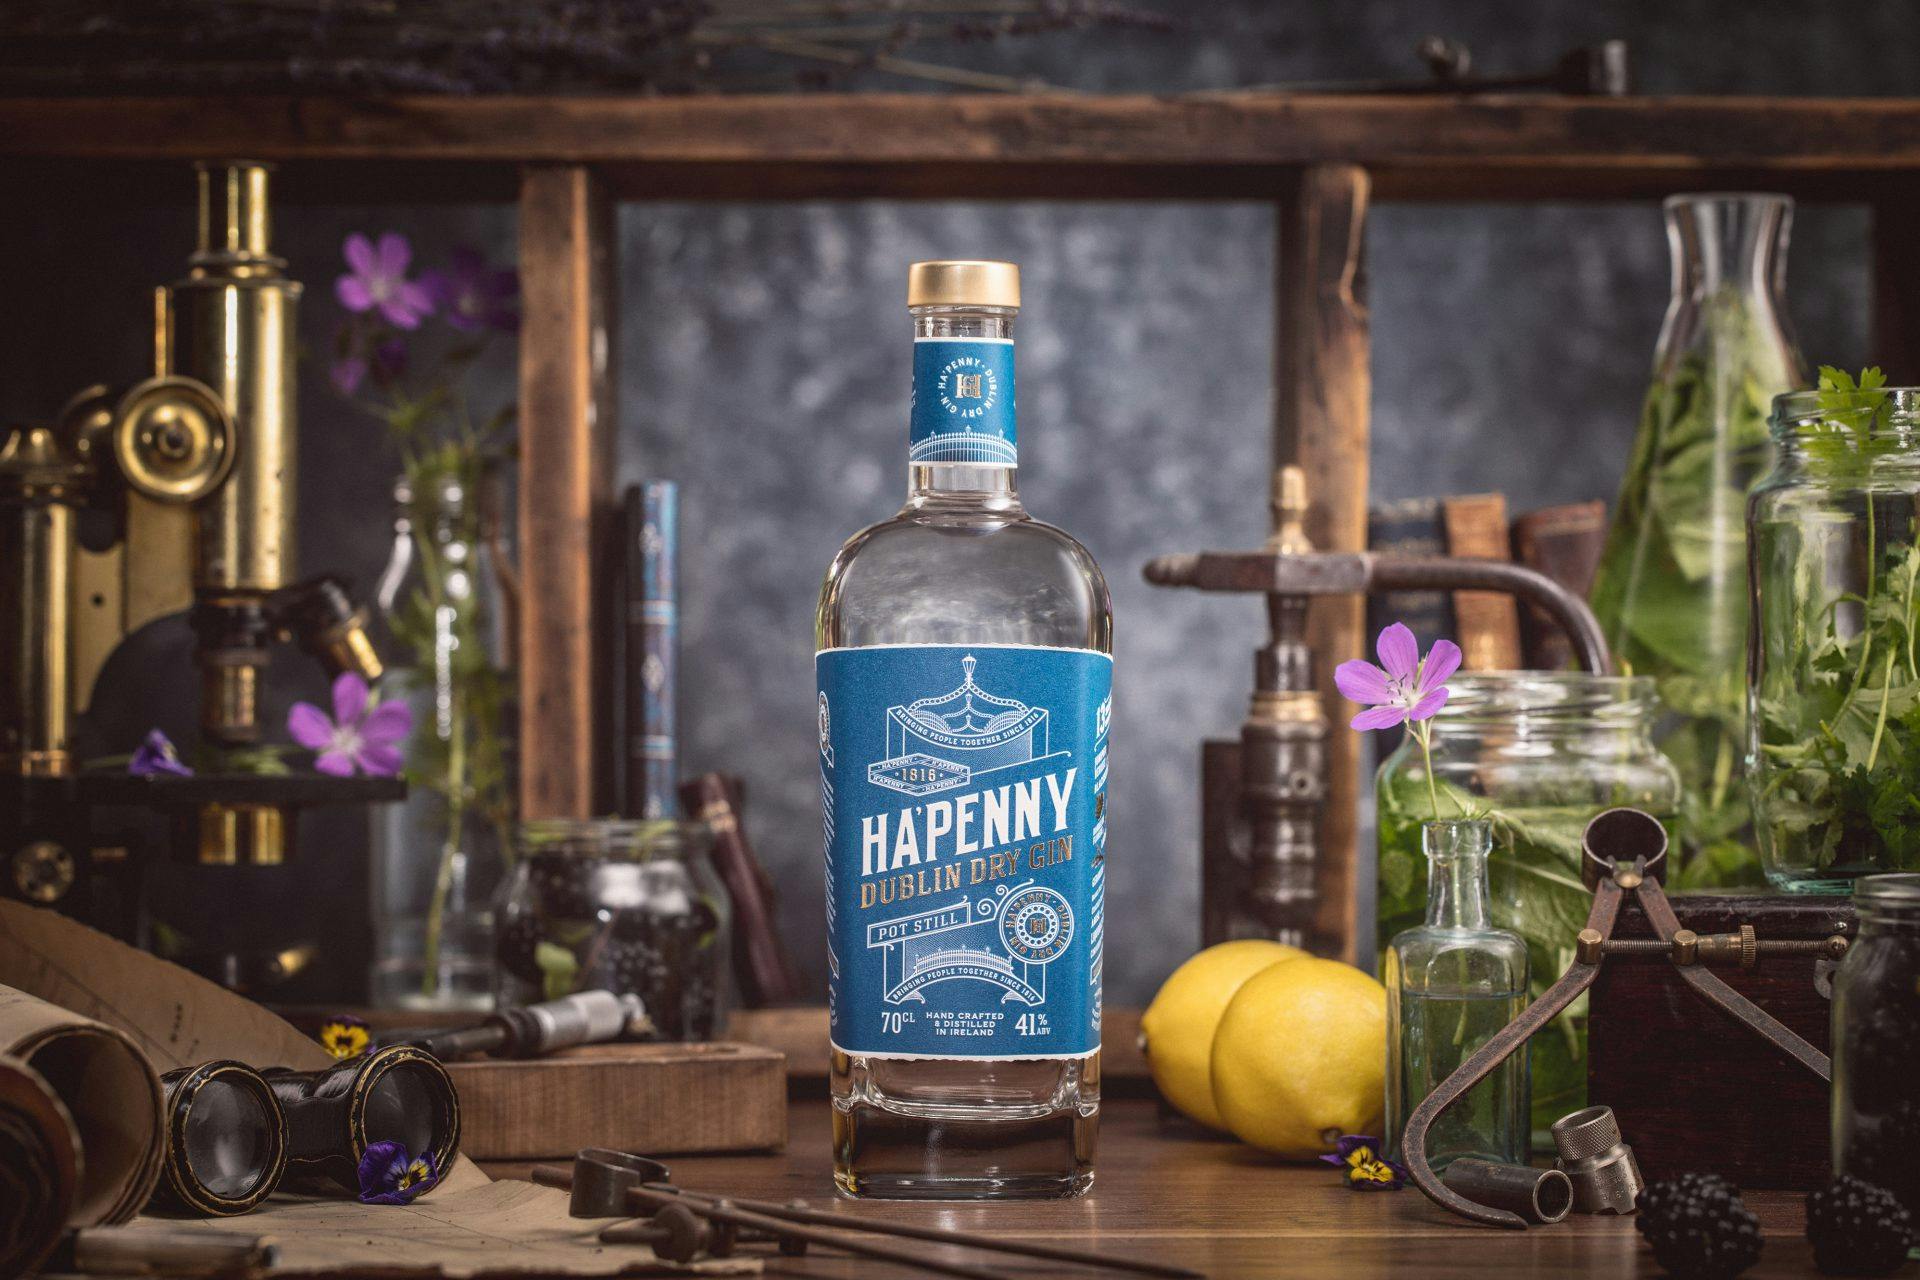 Image of Drinksology and Alltech’s Ha’penny Dublin Dry Gin